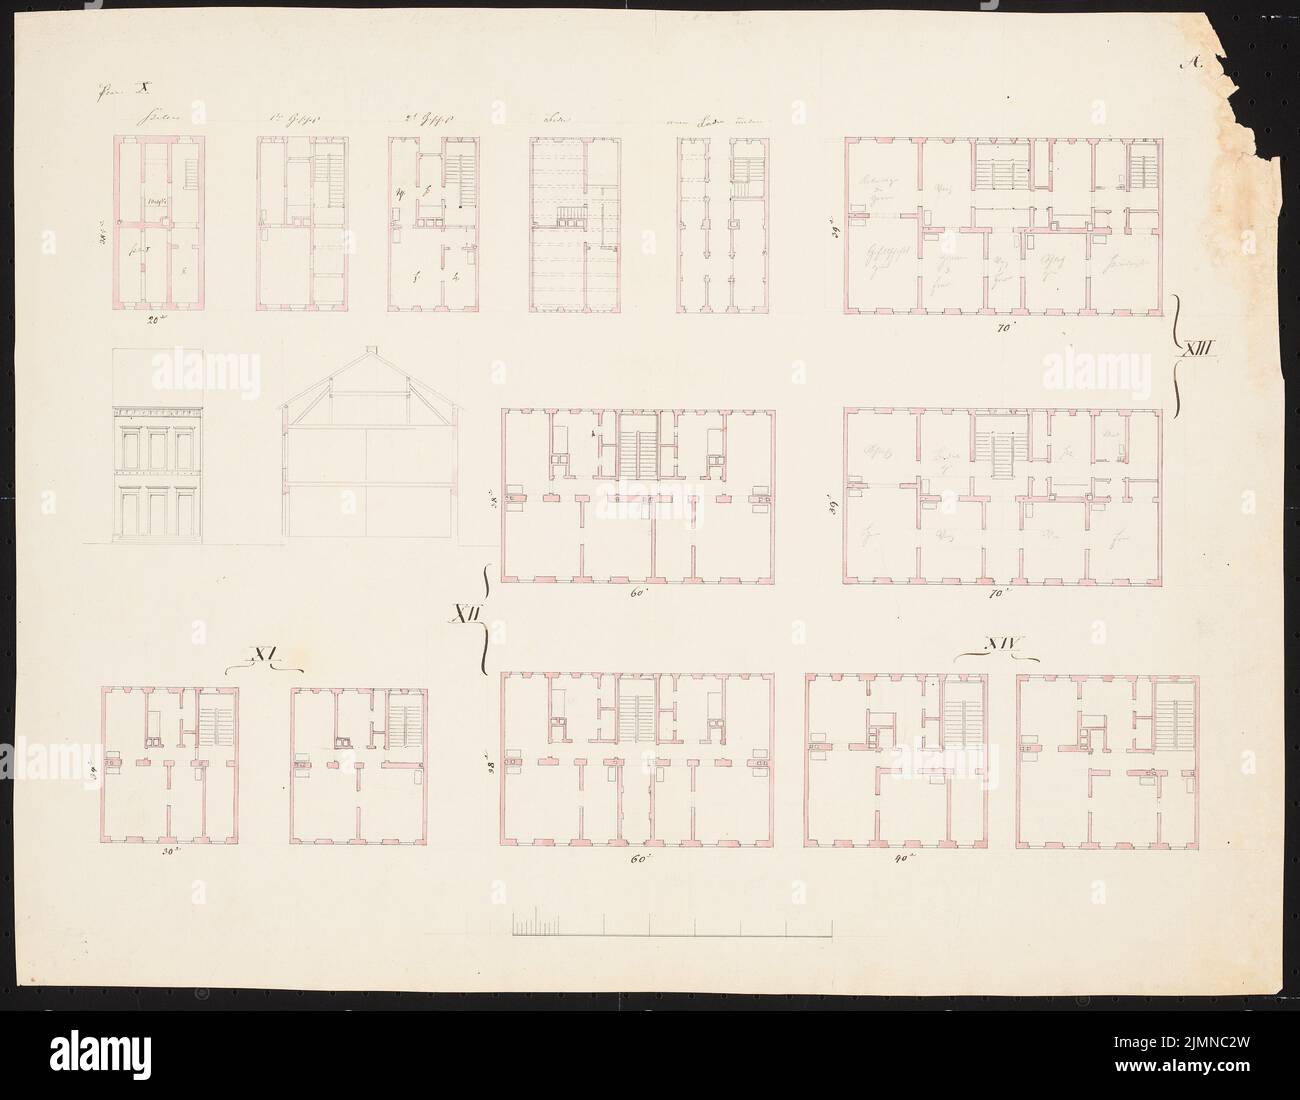 Knoblauch Eduard (1801-1865), floor plan (without date): floor plans without side wings, front view, cut. Tusche watercolor, 43.4 x 55.8 cm (including scan edges) Stock Photo